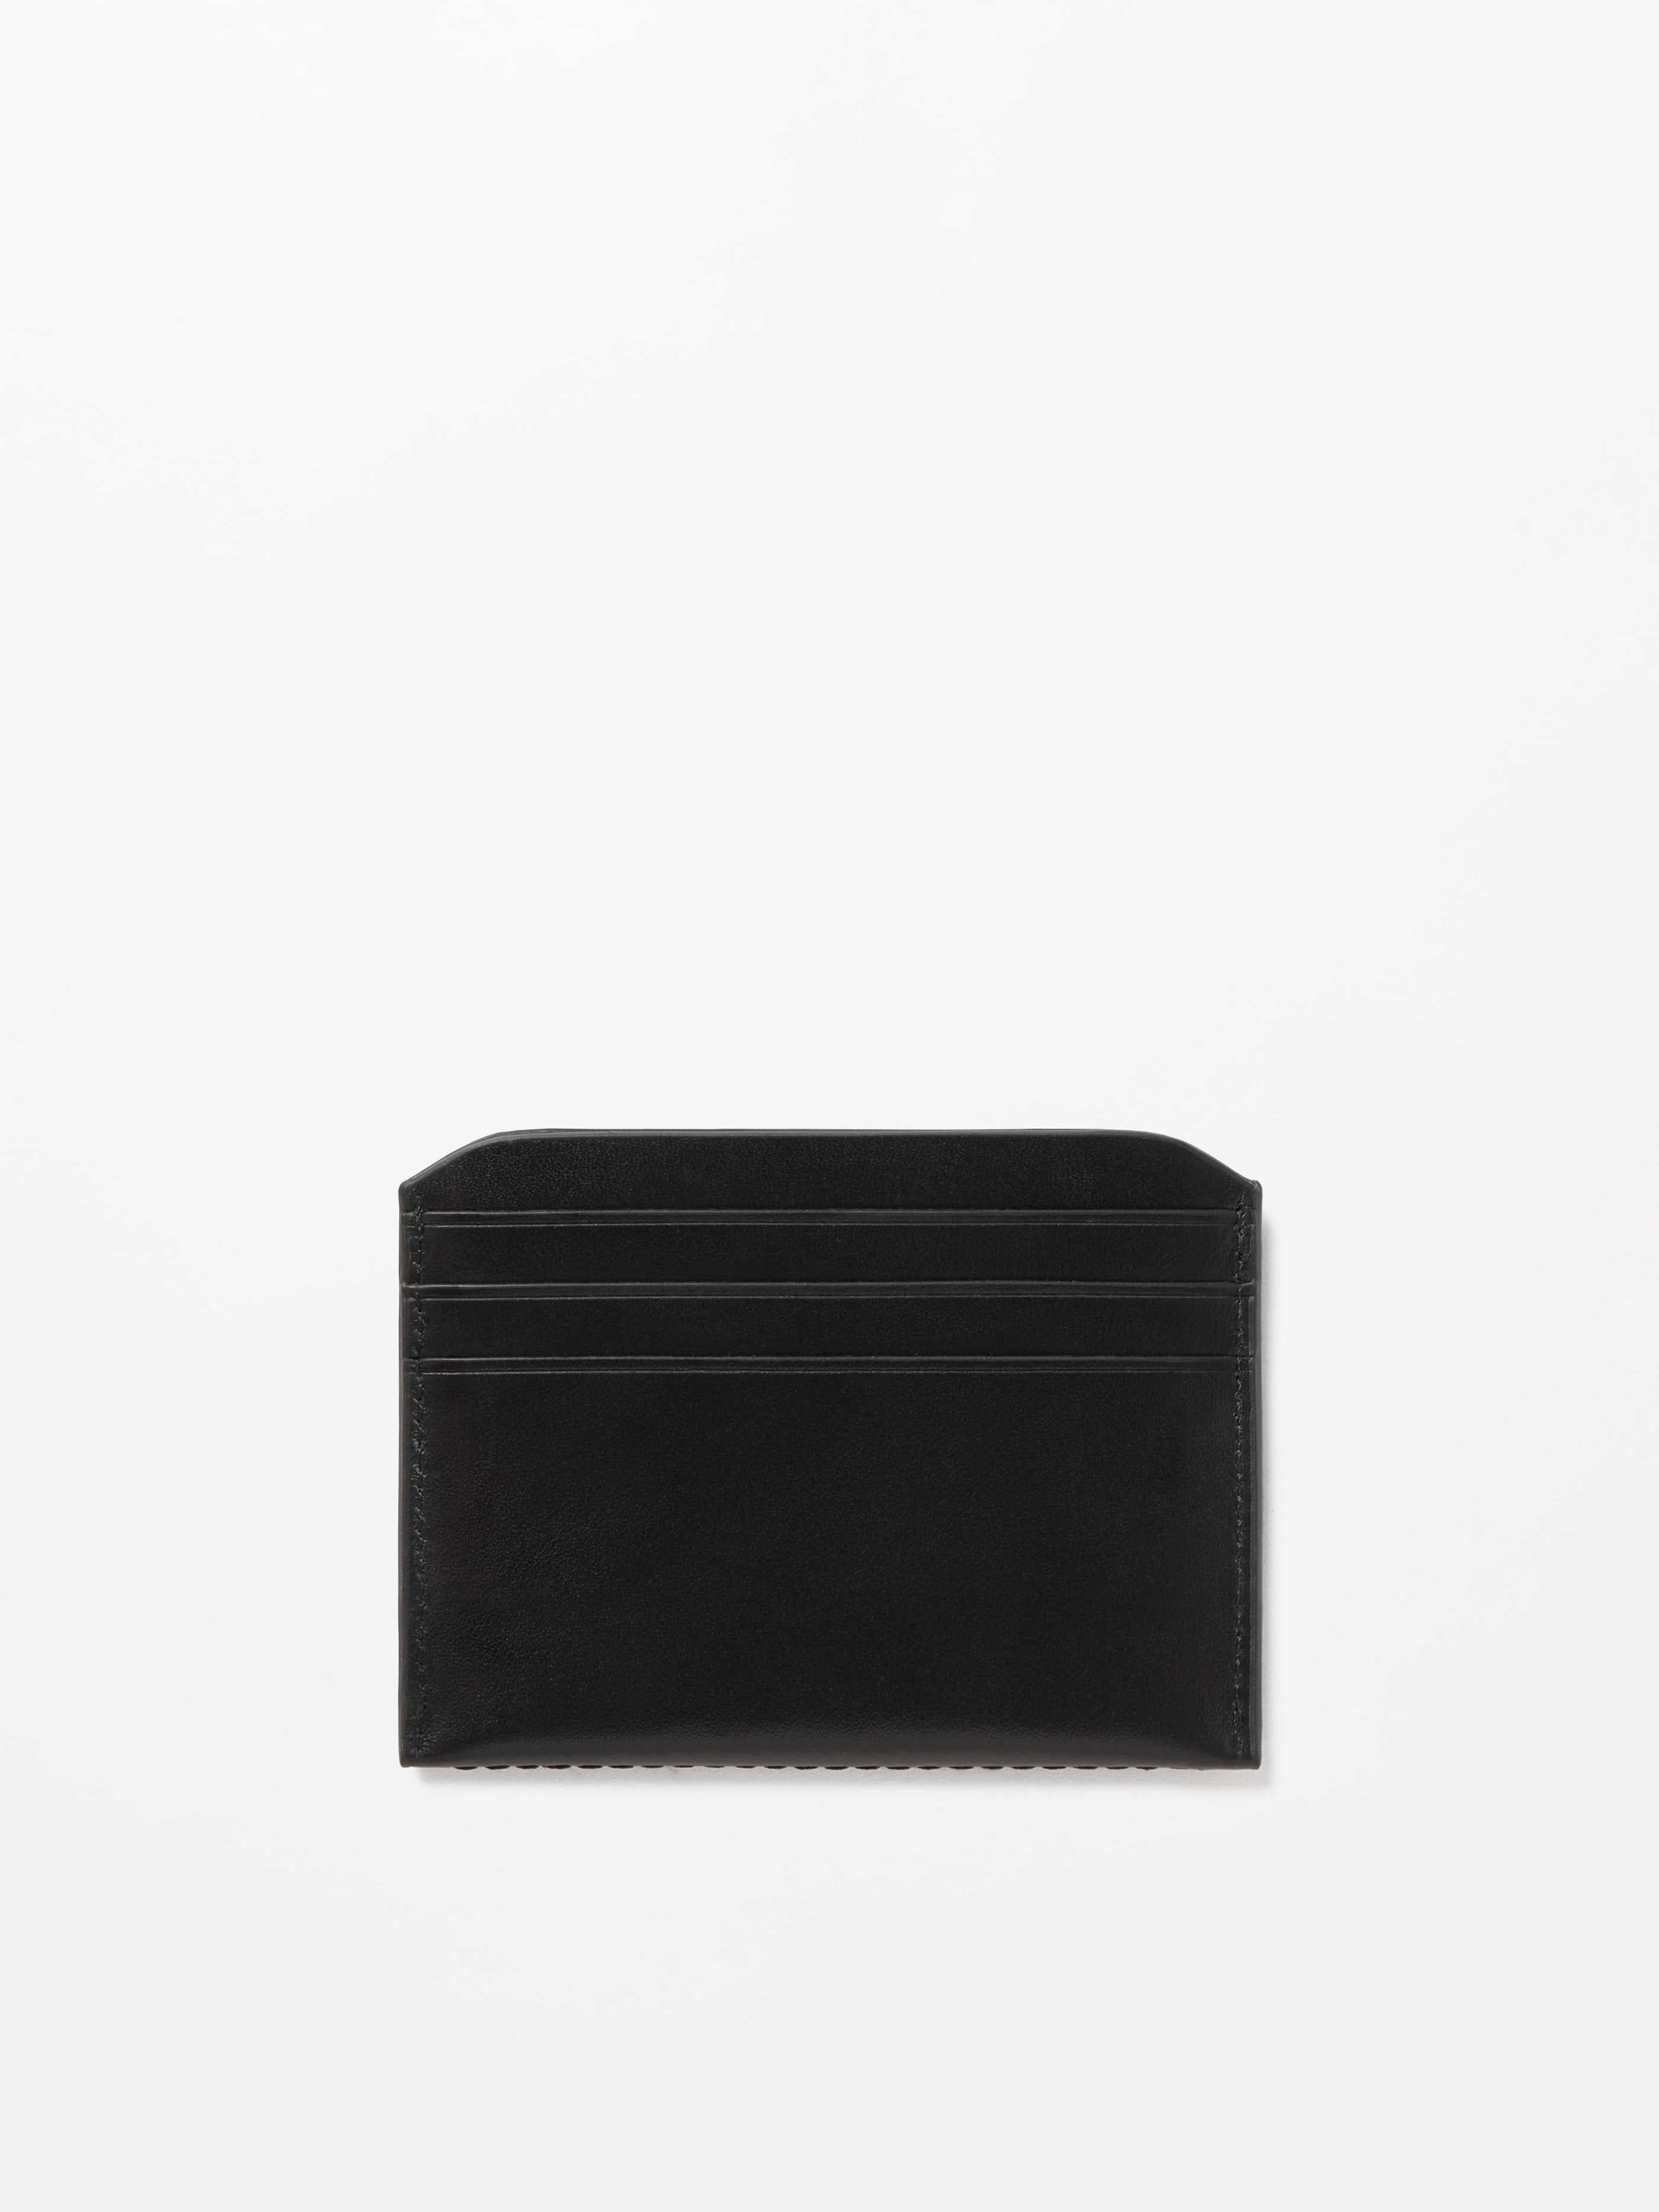 Tiger of Sweden Niam Cardholder T69097051 Black Smooth Leather |  Shop from eightywingold an official brand partner for Tiger of Sweden Canada and US